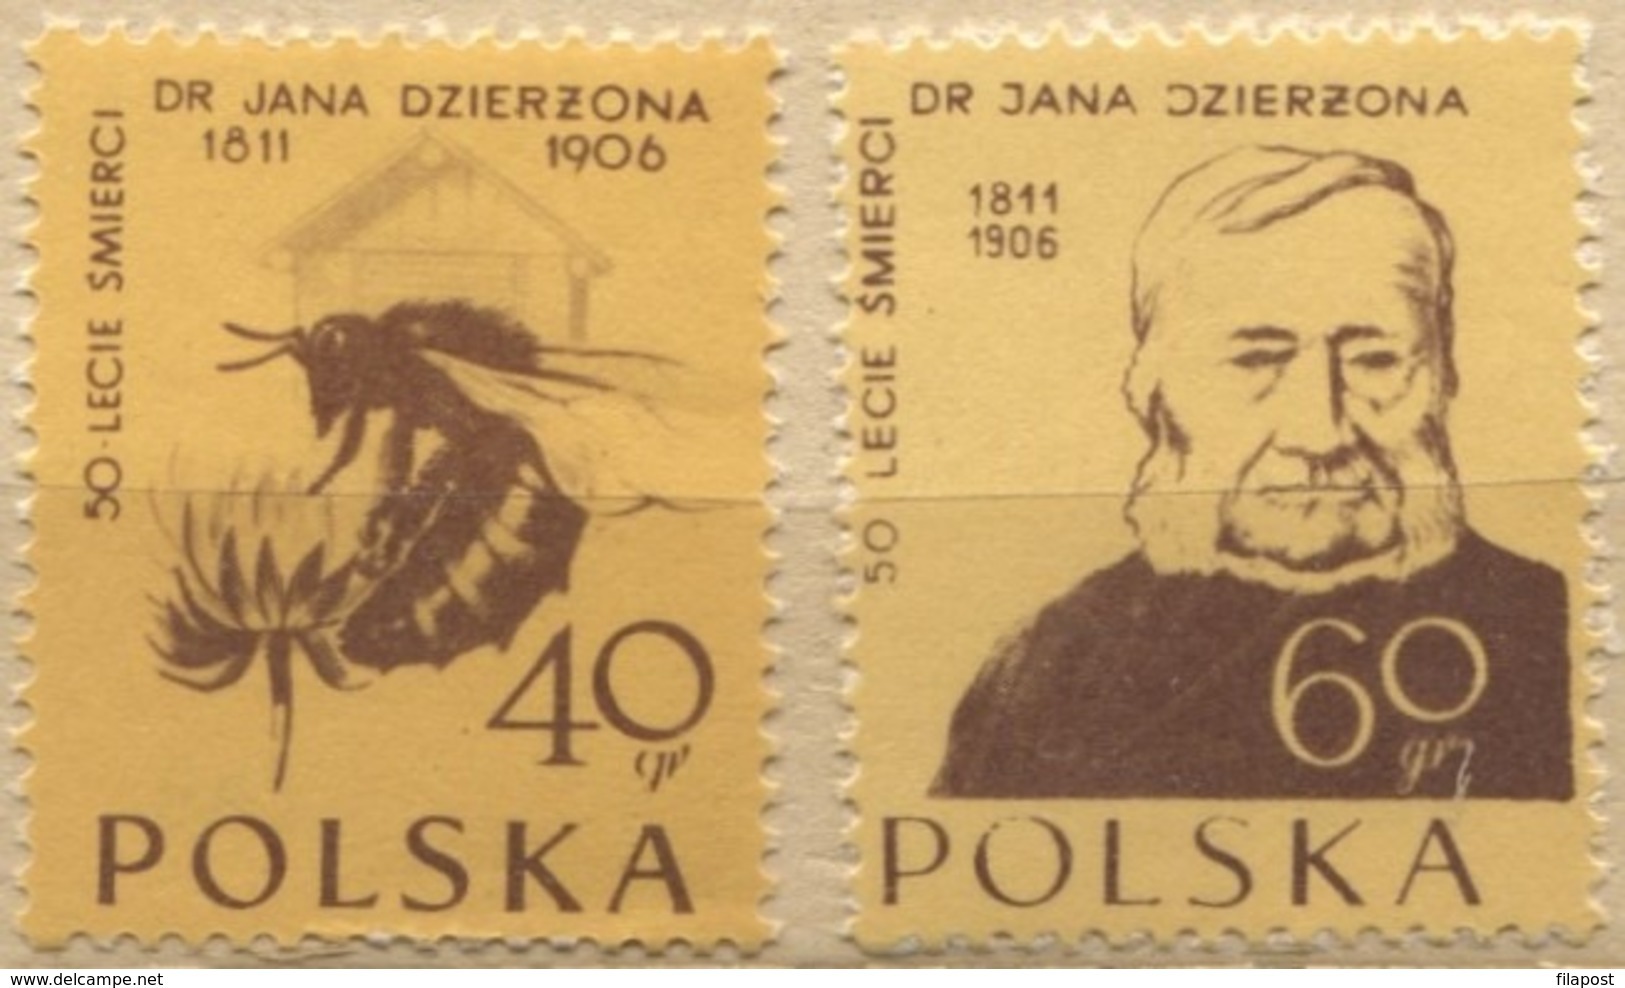 Poland 1956 Doctor Jan Dzierzon - Pioneering Polish Apiarist, Beekeeper, Bees MNH** - Unused Stamps